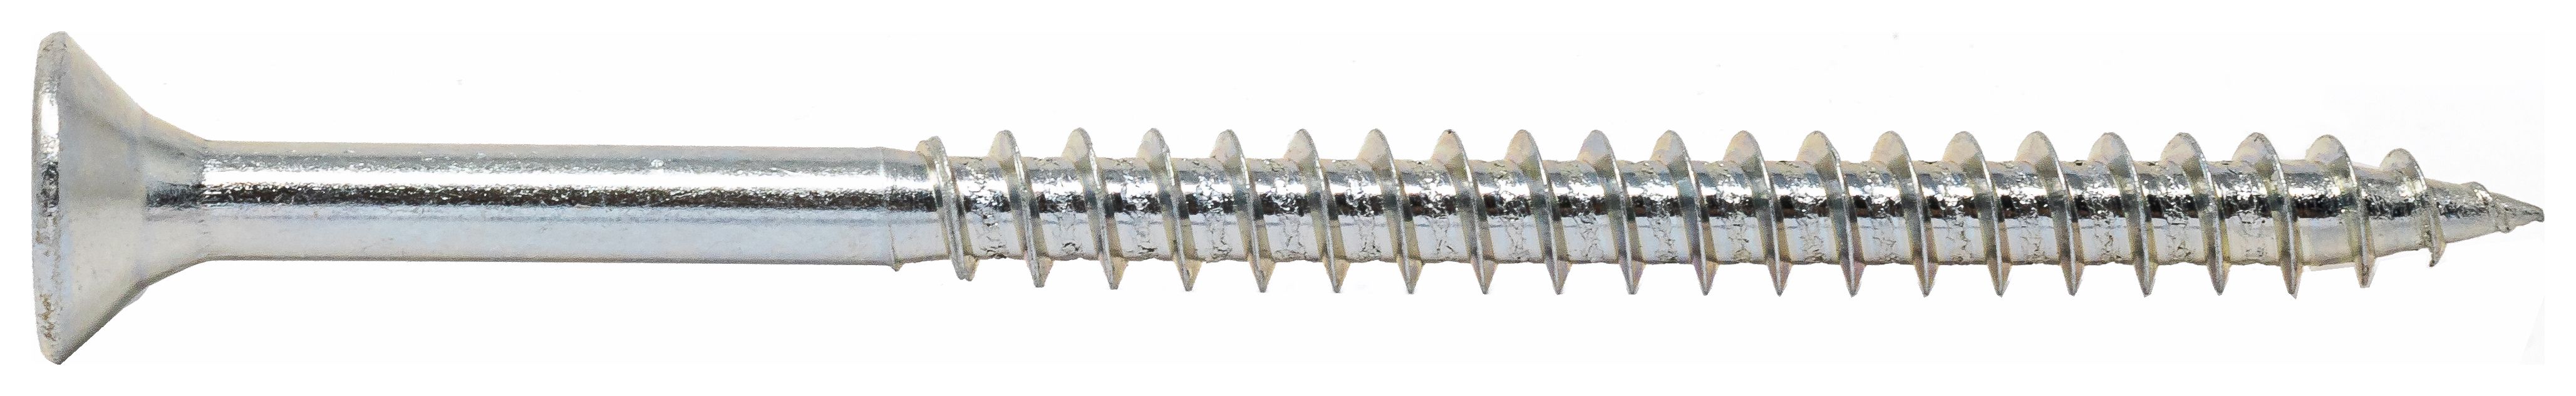 Image of Wickes Single Thread Zinc Plated Screw - 3.5 X 40mm Pack Of 200